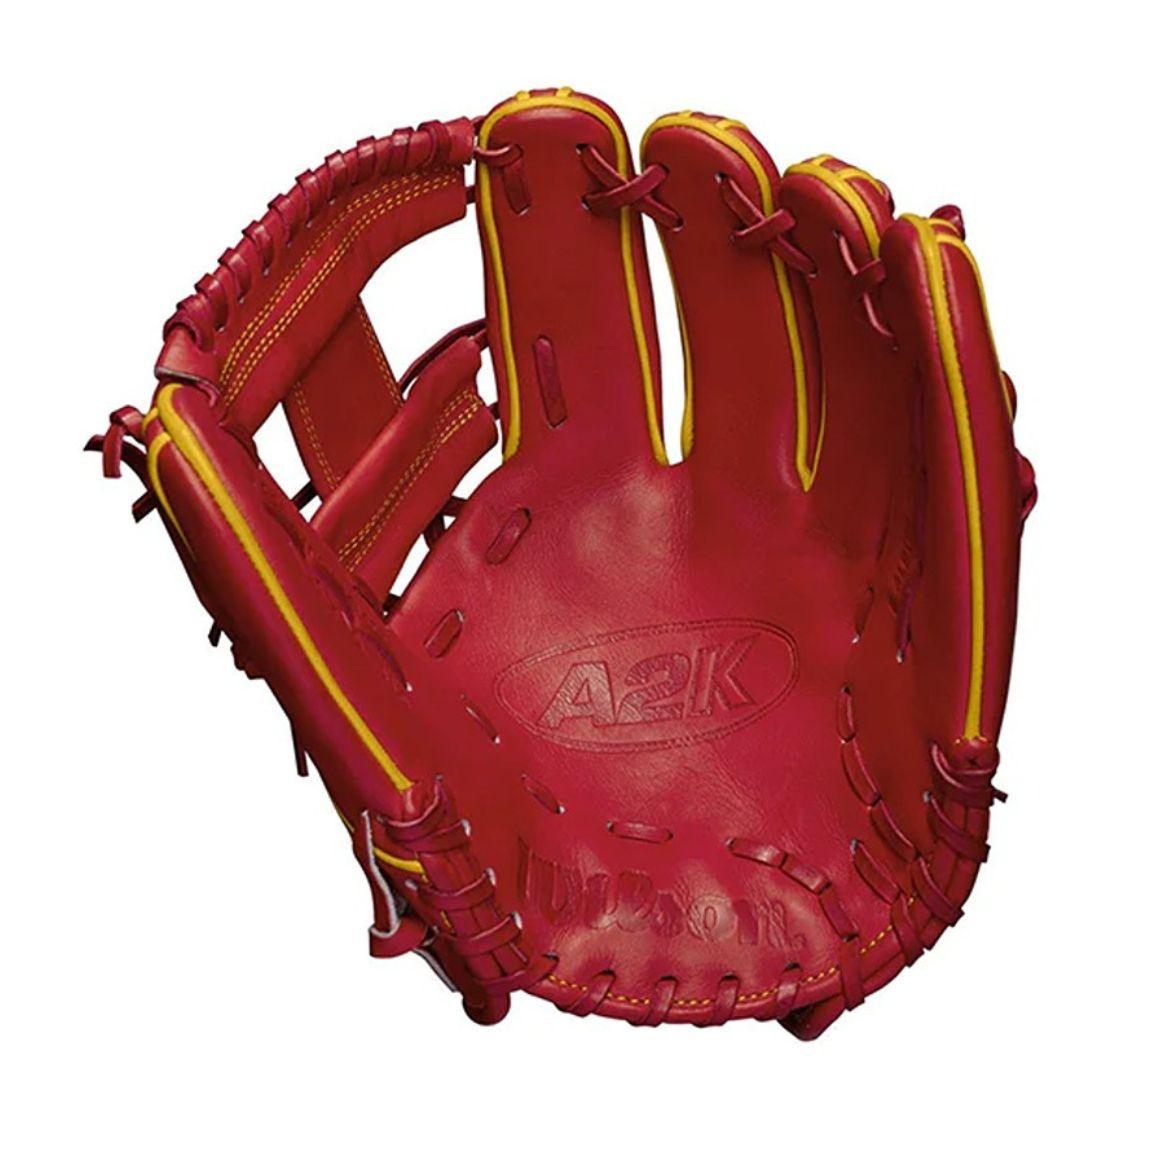 A2K Ozzie Albies 11.5" Baseball Glove - Sports Excellence